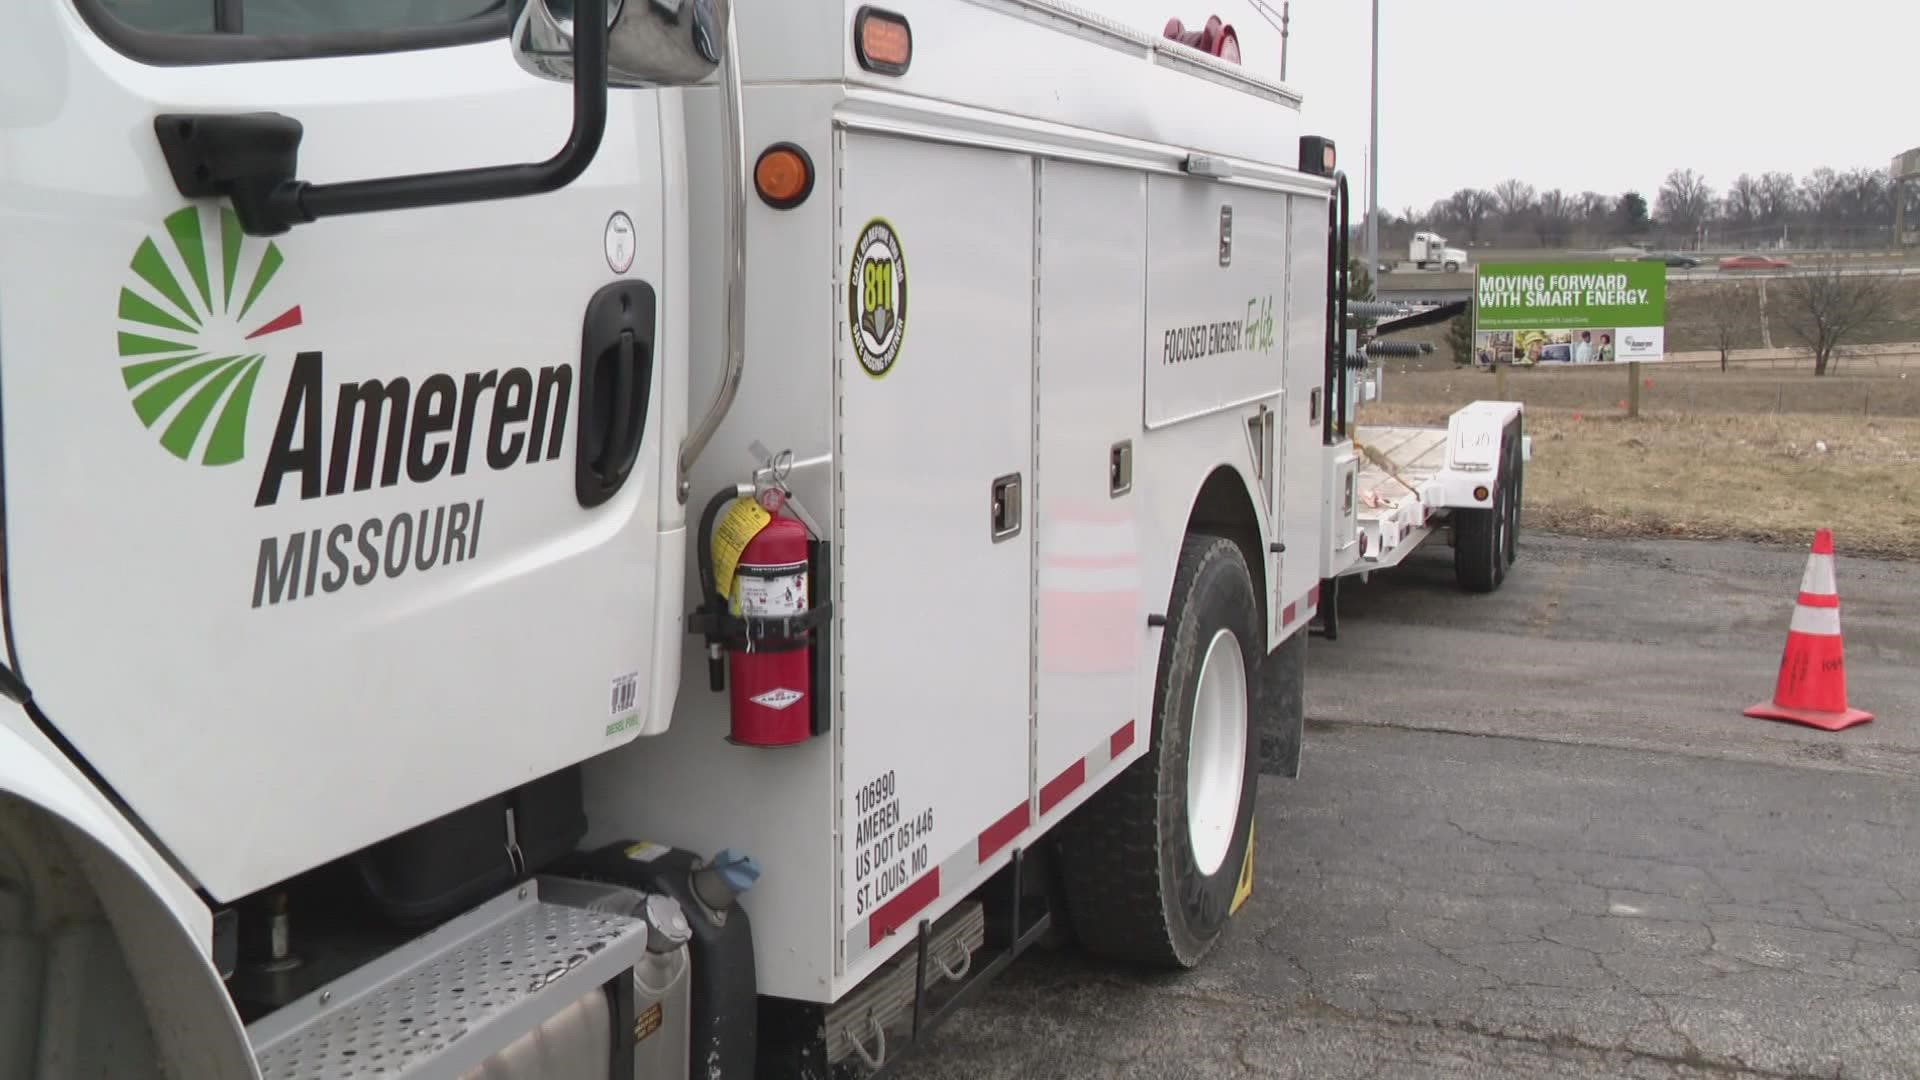 Ameren Missouri's Director of Distribution Operations said they forecast being in this state of readiness until midday Saturday.